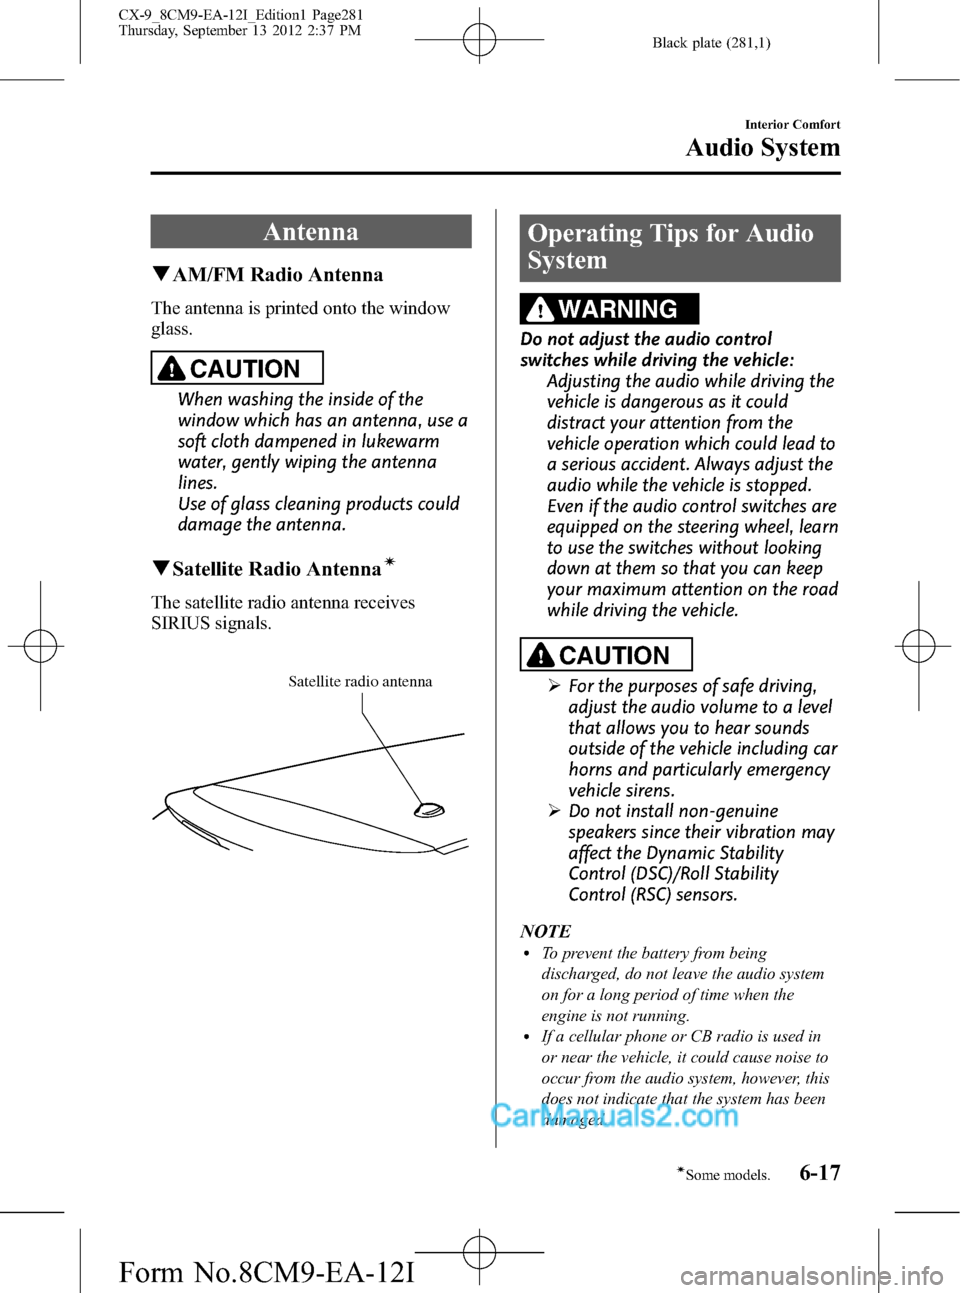 MAZDA MODEL CX-9 2013  Owners Manual (in English) Black plate (281,1)
Antenna
qAM/FM Radio Antenna
The antenna is printed onto the window
glass.
CAUTION
When washing the inside of the
window which has an antenna, use a
soft cloth dampened in lukewarm